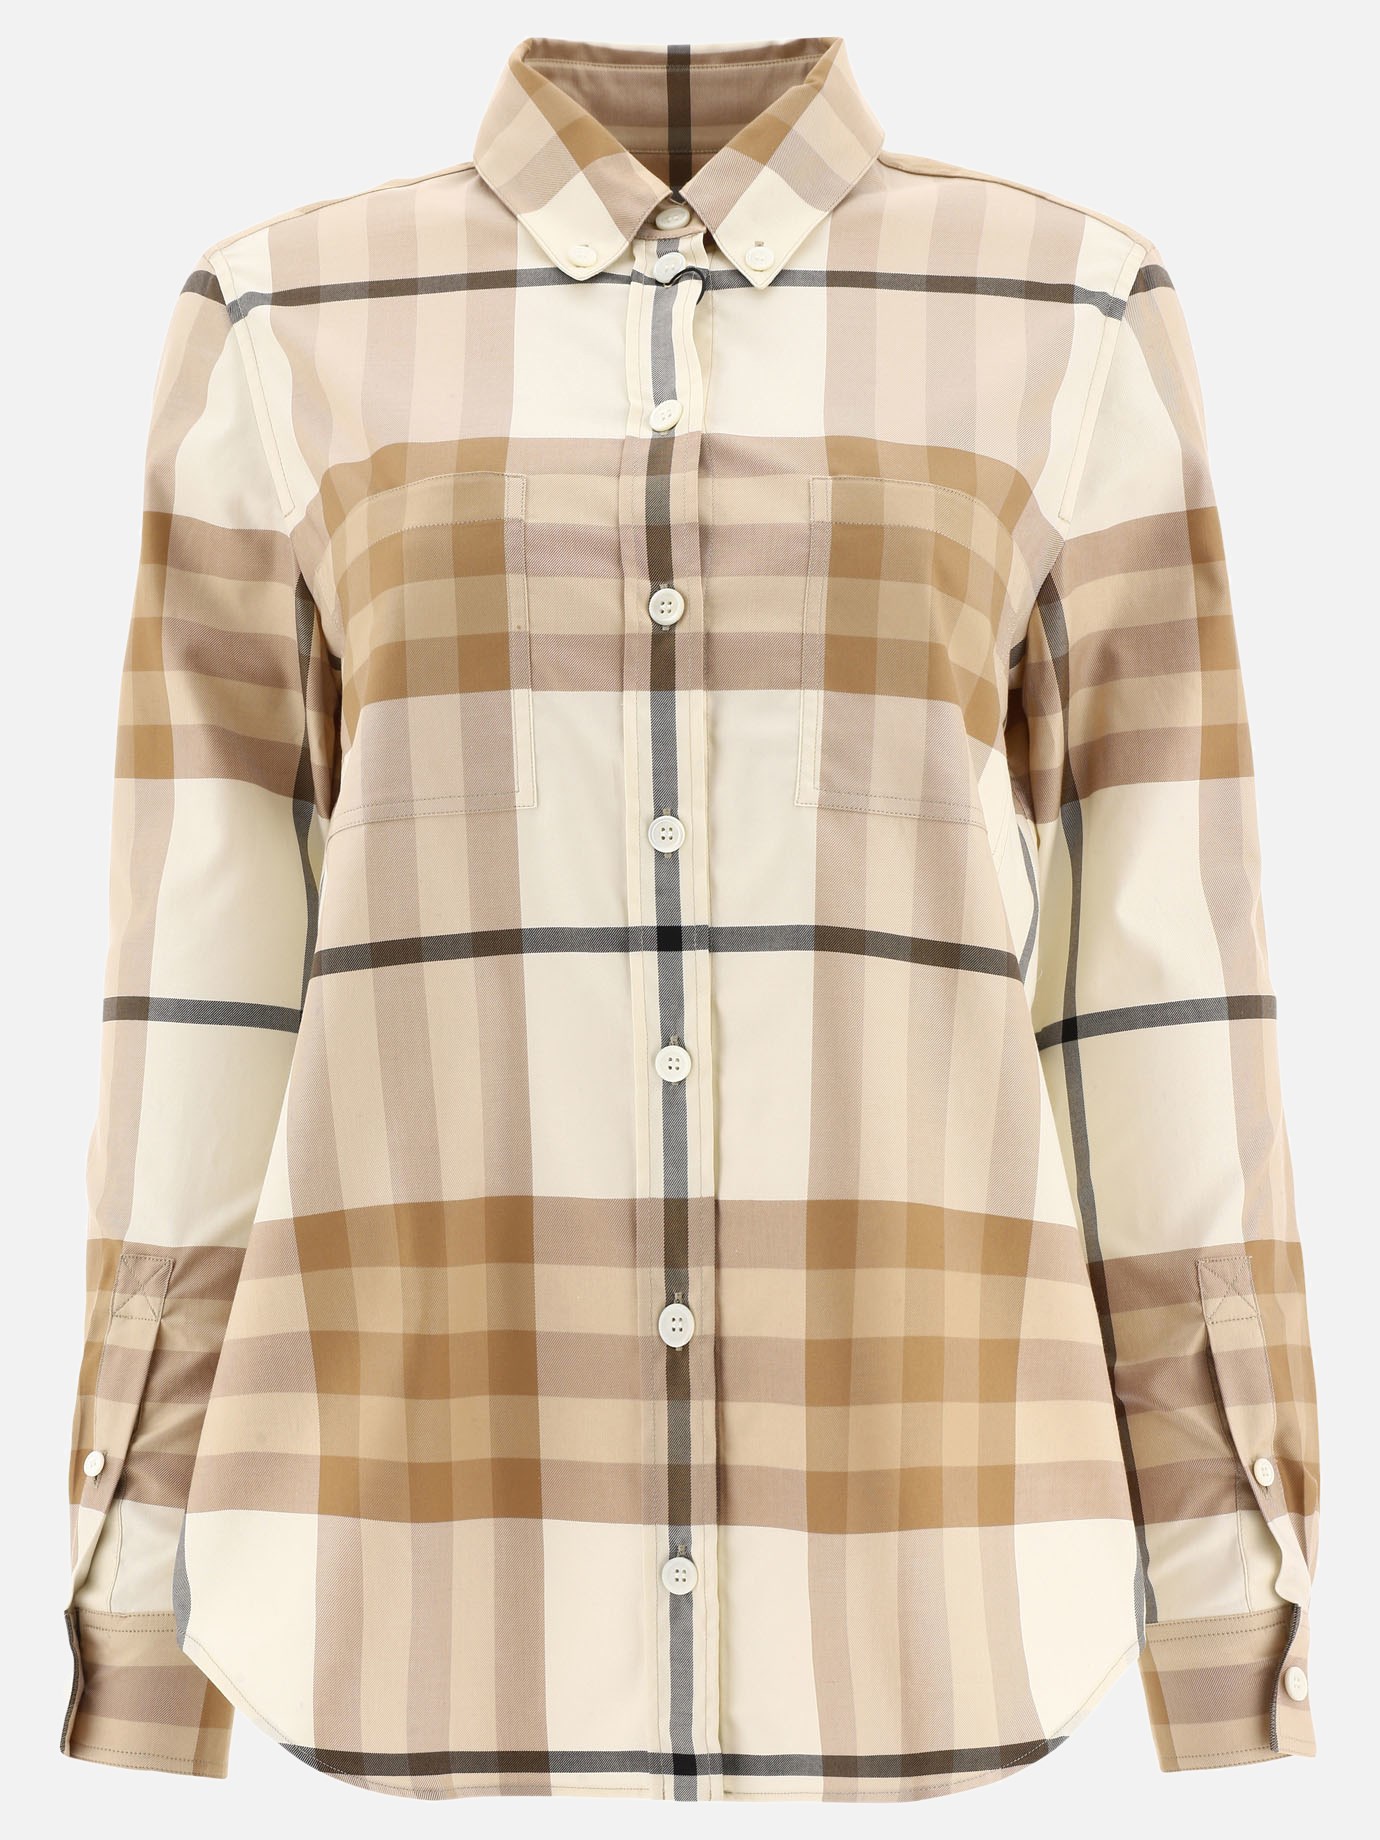  Anette  shirtby Burberry - 3